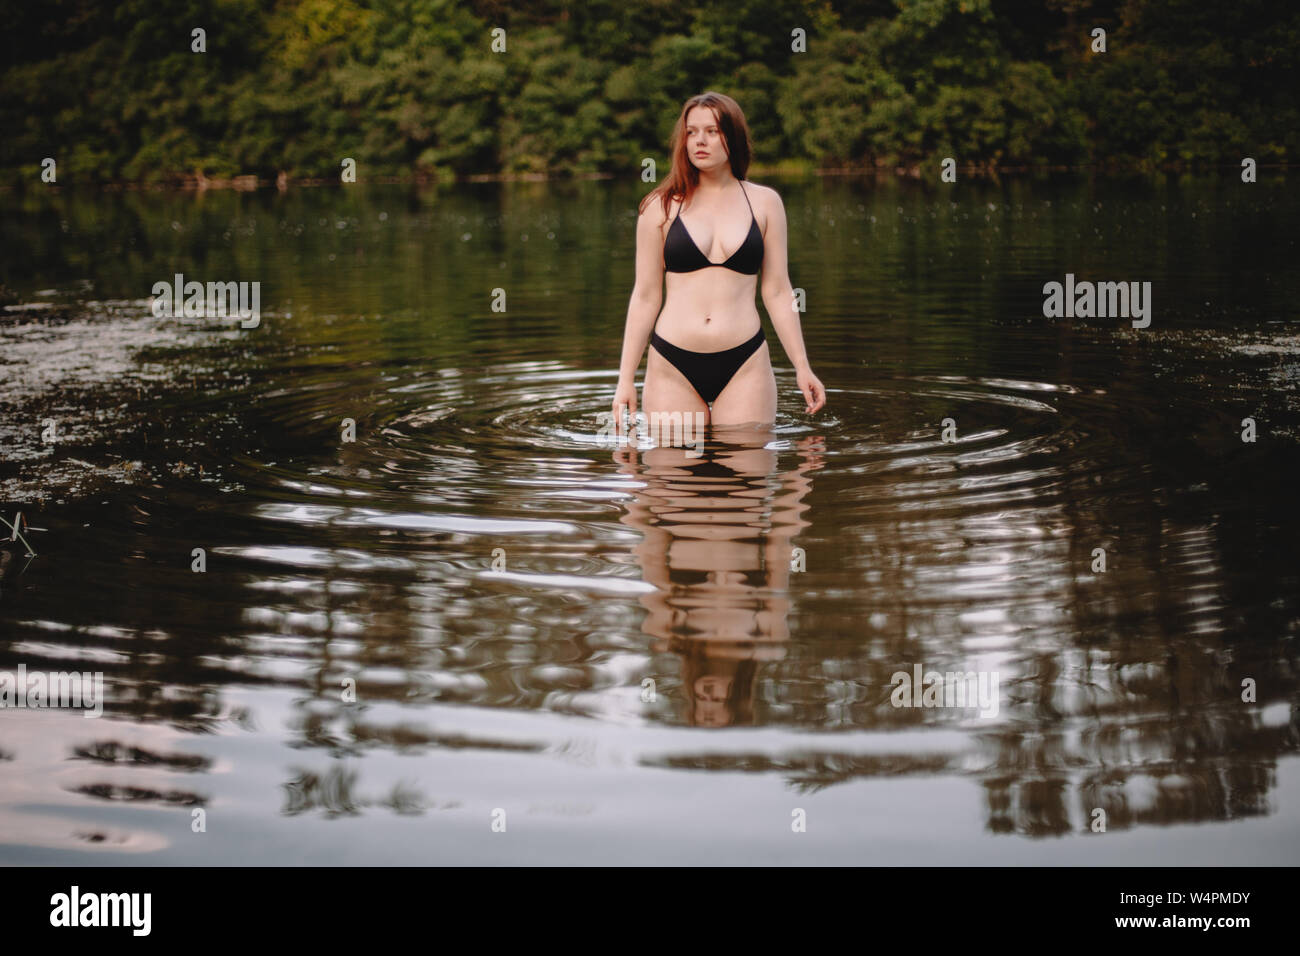 Front view of young woman standing in lake Stock Photo